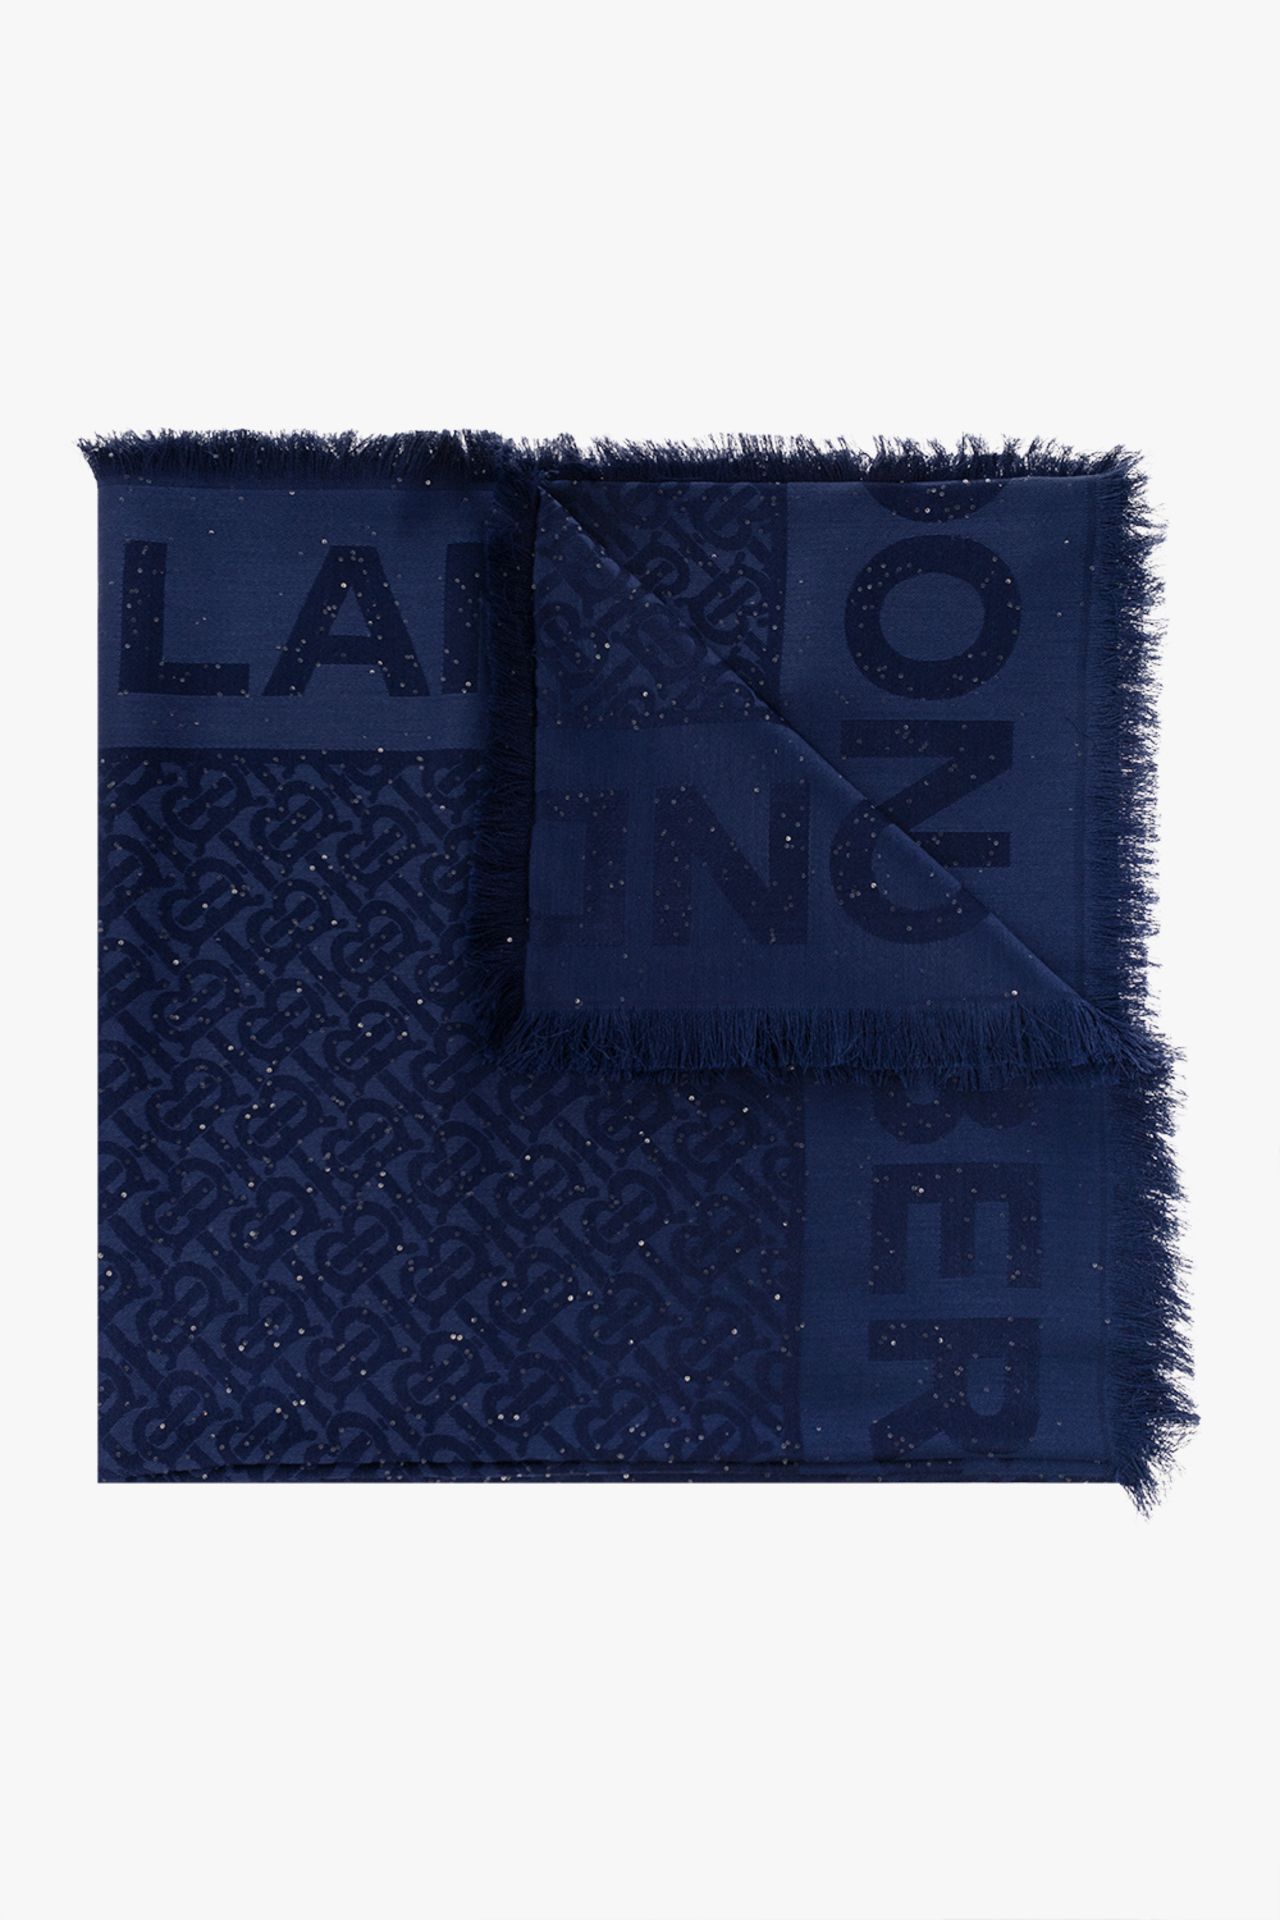 Genuine Burberry Navy Wool&Silk TB Logo Square Scarf. RRP £475. (slightly pulled) - Image 3 of 8